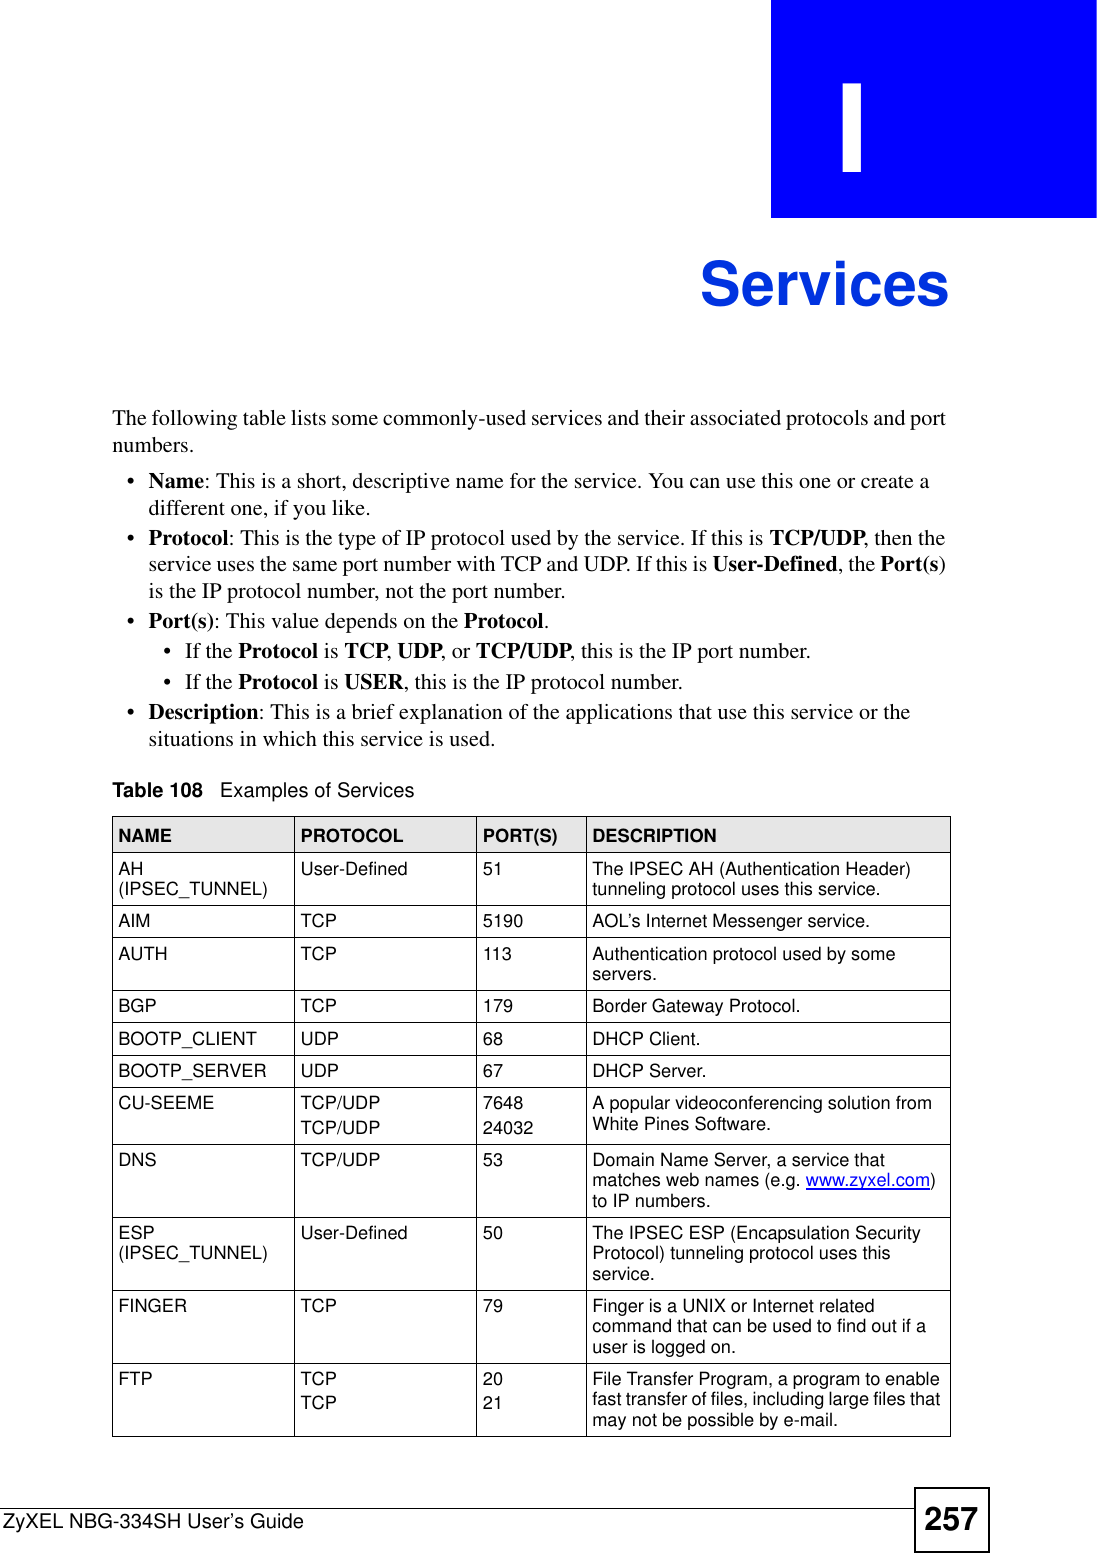 ZyXEL NBG-334SH User’s Guide 257APPENDIX  I ServicesThe following table lists some commonly-used services and their associated protocols and port numbers.•Name: This is a short, descriptive name for the service. You can use this one or create a different one, if you like.•Protocol: This is the type of IP protocol used by the service. If this is TCP/UDP, then the service uses the same port number with TCP and UDP. If this is User-Defined, the Port(s)is the IP protocol number, not the port number.•Port(s): This value depends on the Protocol.• If the Protocol is TCP,UDP, or TCP/UDP, this is the IP port number.• If the Protocol is USER, this is the IP protocol number.•Description: This is a brief explanation of the applications that use this service or the situations in which this service is used.Table 108   Examples of ServicesNAME PROTOCOL PORT(S) DESCRIPTIONAH(IPSEC_TUNNEL) User-Defined 51 The IPSEC AH (Authentication Header) tunneling protocol uses this service.AIM TCP 5190 AOL’s Internet Messenger service.AUTH TCP 113 Authentication protocol used by some servers.BGP TCP 179 Border Gateway Protocol.BOOTP_CLIENT UDP 68 DHCP Client.BOOTP_SERVER UDP 67 DHCP Server.CU-SEEME TCP/UDPTCP/UDP 764824032A popular videoconferencing solution from White Pines Software.DNS TCP/UDP 53 Domain Name Server, a service that matches web names (e.g. www.zyxel.com)to IP numbers.ESP(IPSEC_TUNNEL) User-Defined 50 The IPSEC ESP (Encapsulation Security Protocol) tunneling protocol uses this service.FINGER TCP 79 Finger is a UNIX or Internet related command that can be used to find out if a user is logged on.FTP TCPTCP2021File Transfer Program, a program to enable fast transfer of files, including large files that may not be possible by e-mail.